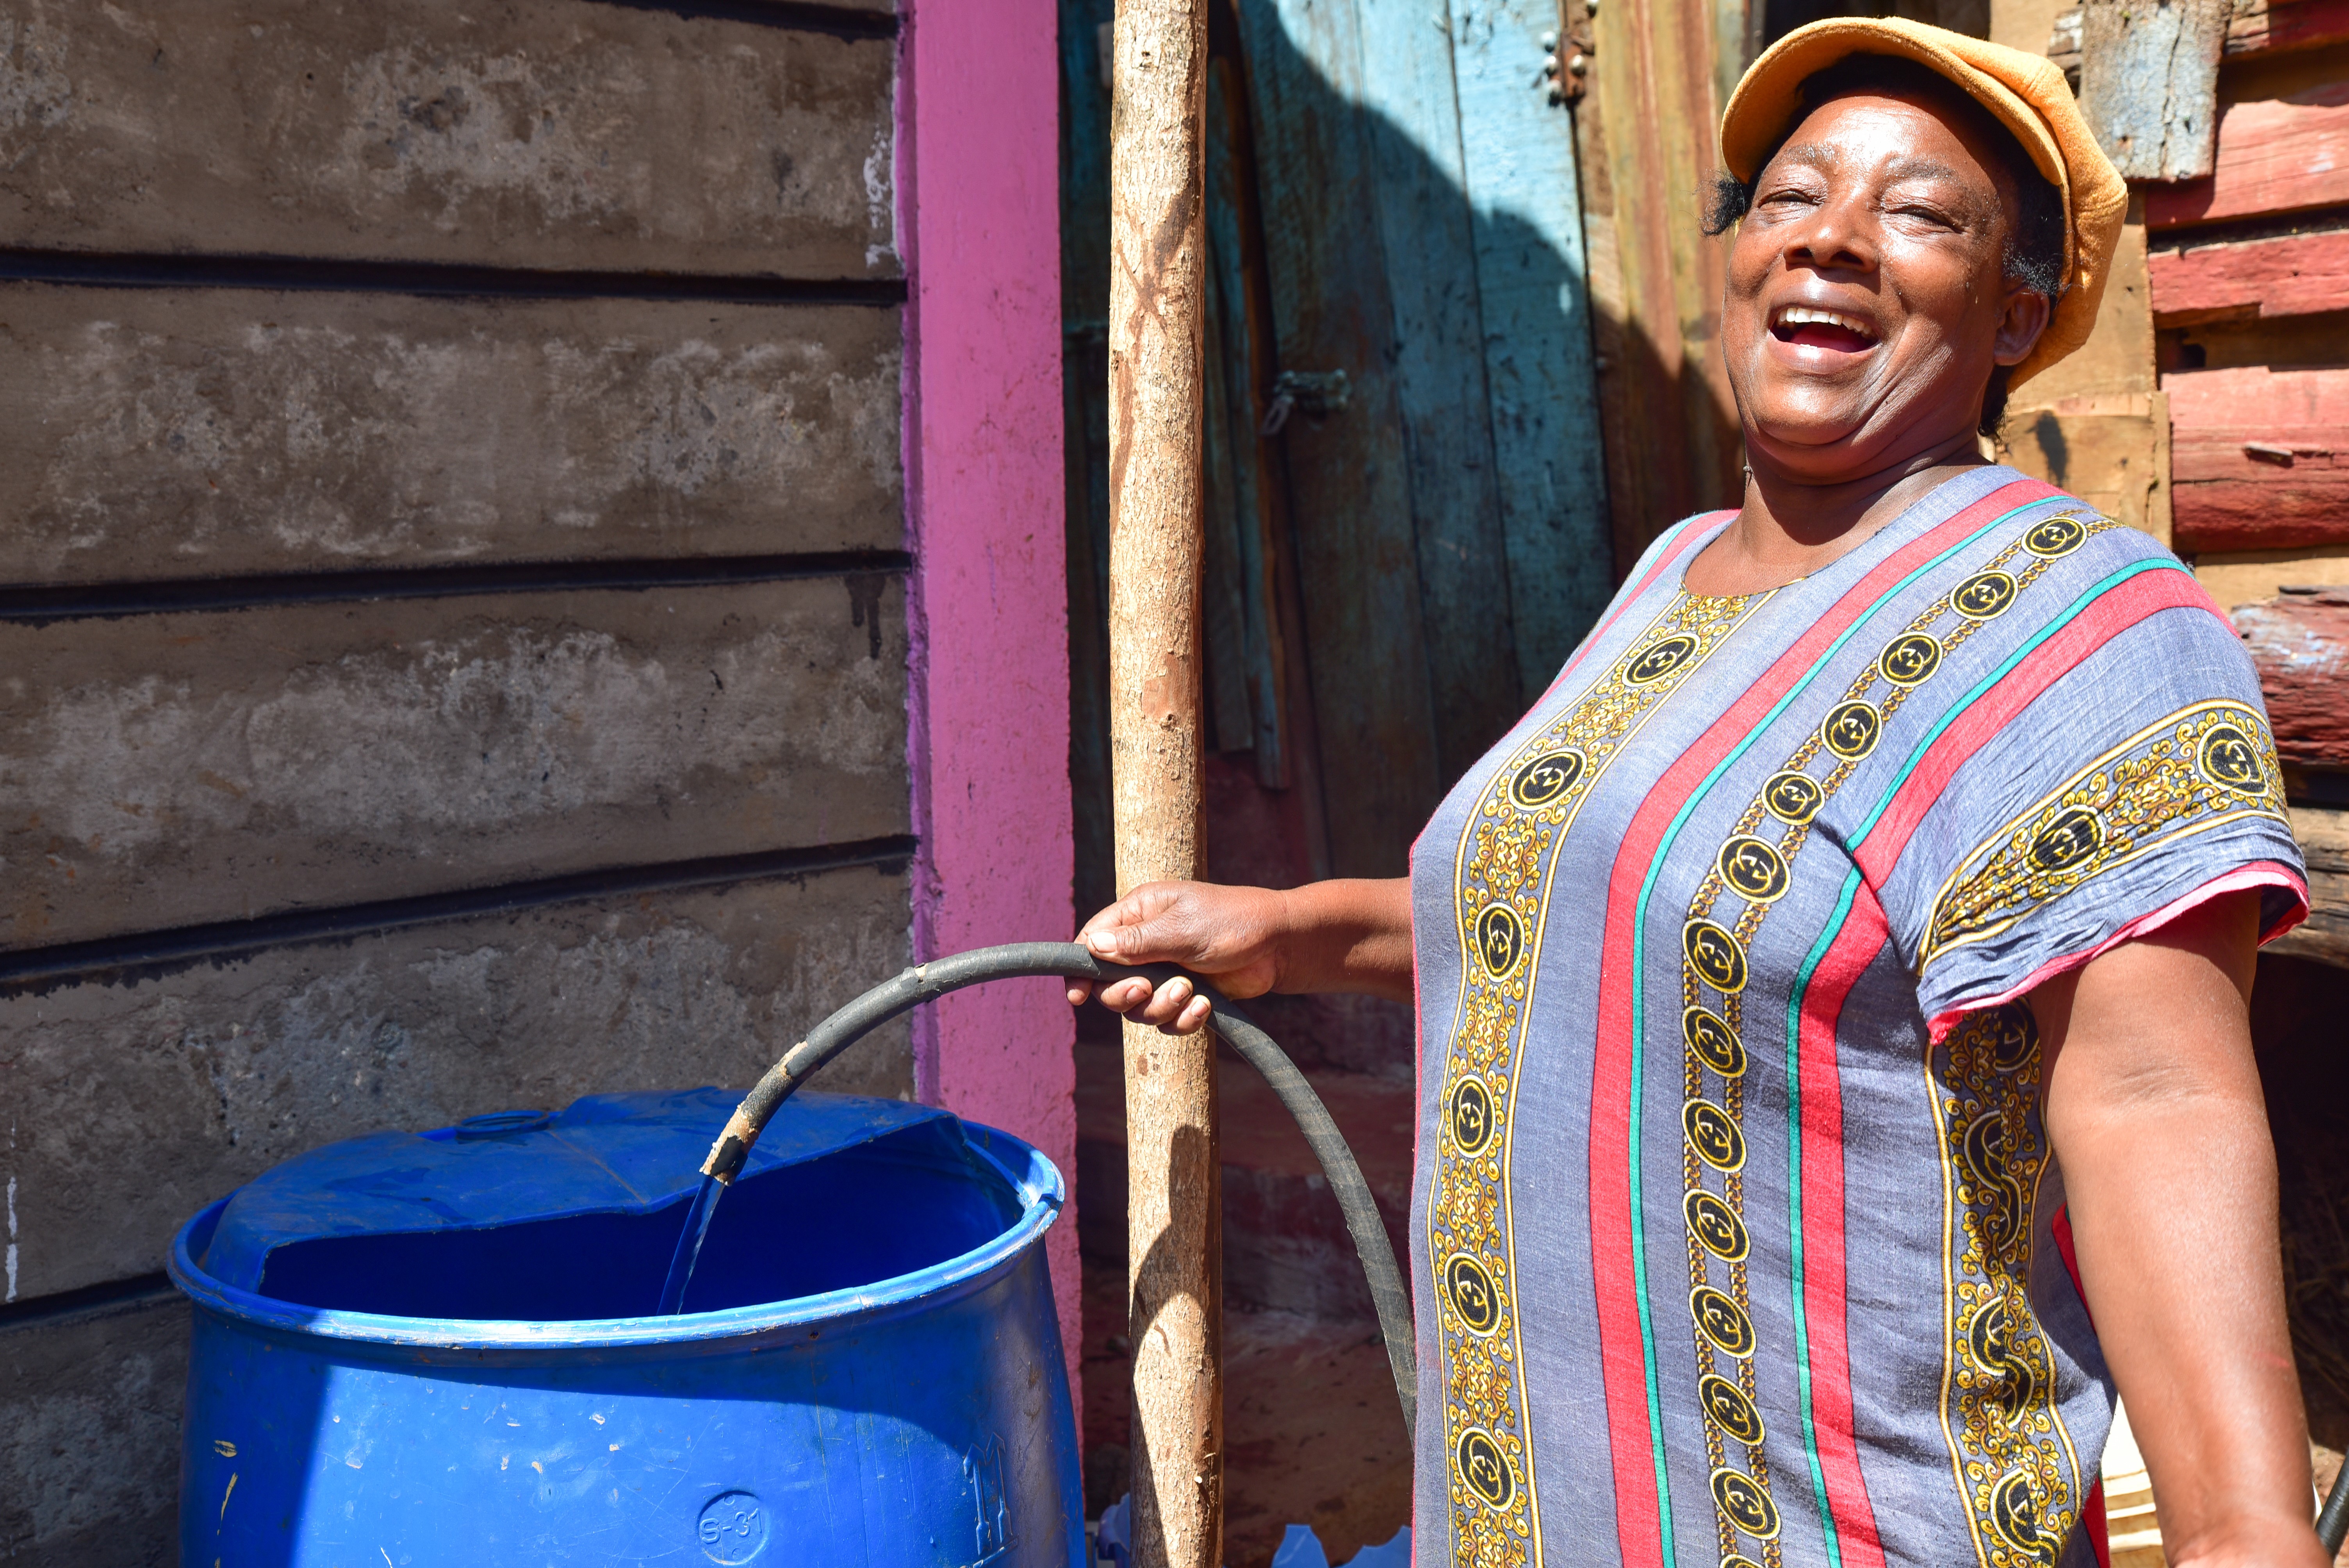 Reliable clean water supply is the basis for good hygiene practice in Kenya. Photo Credit: Adobe Stock